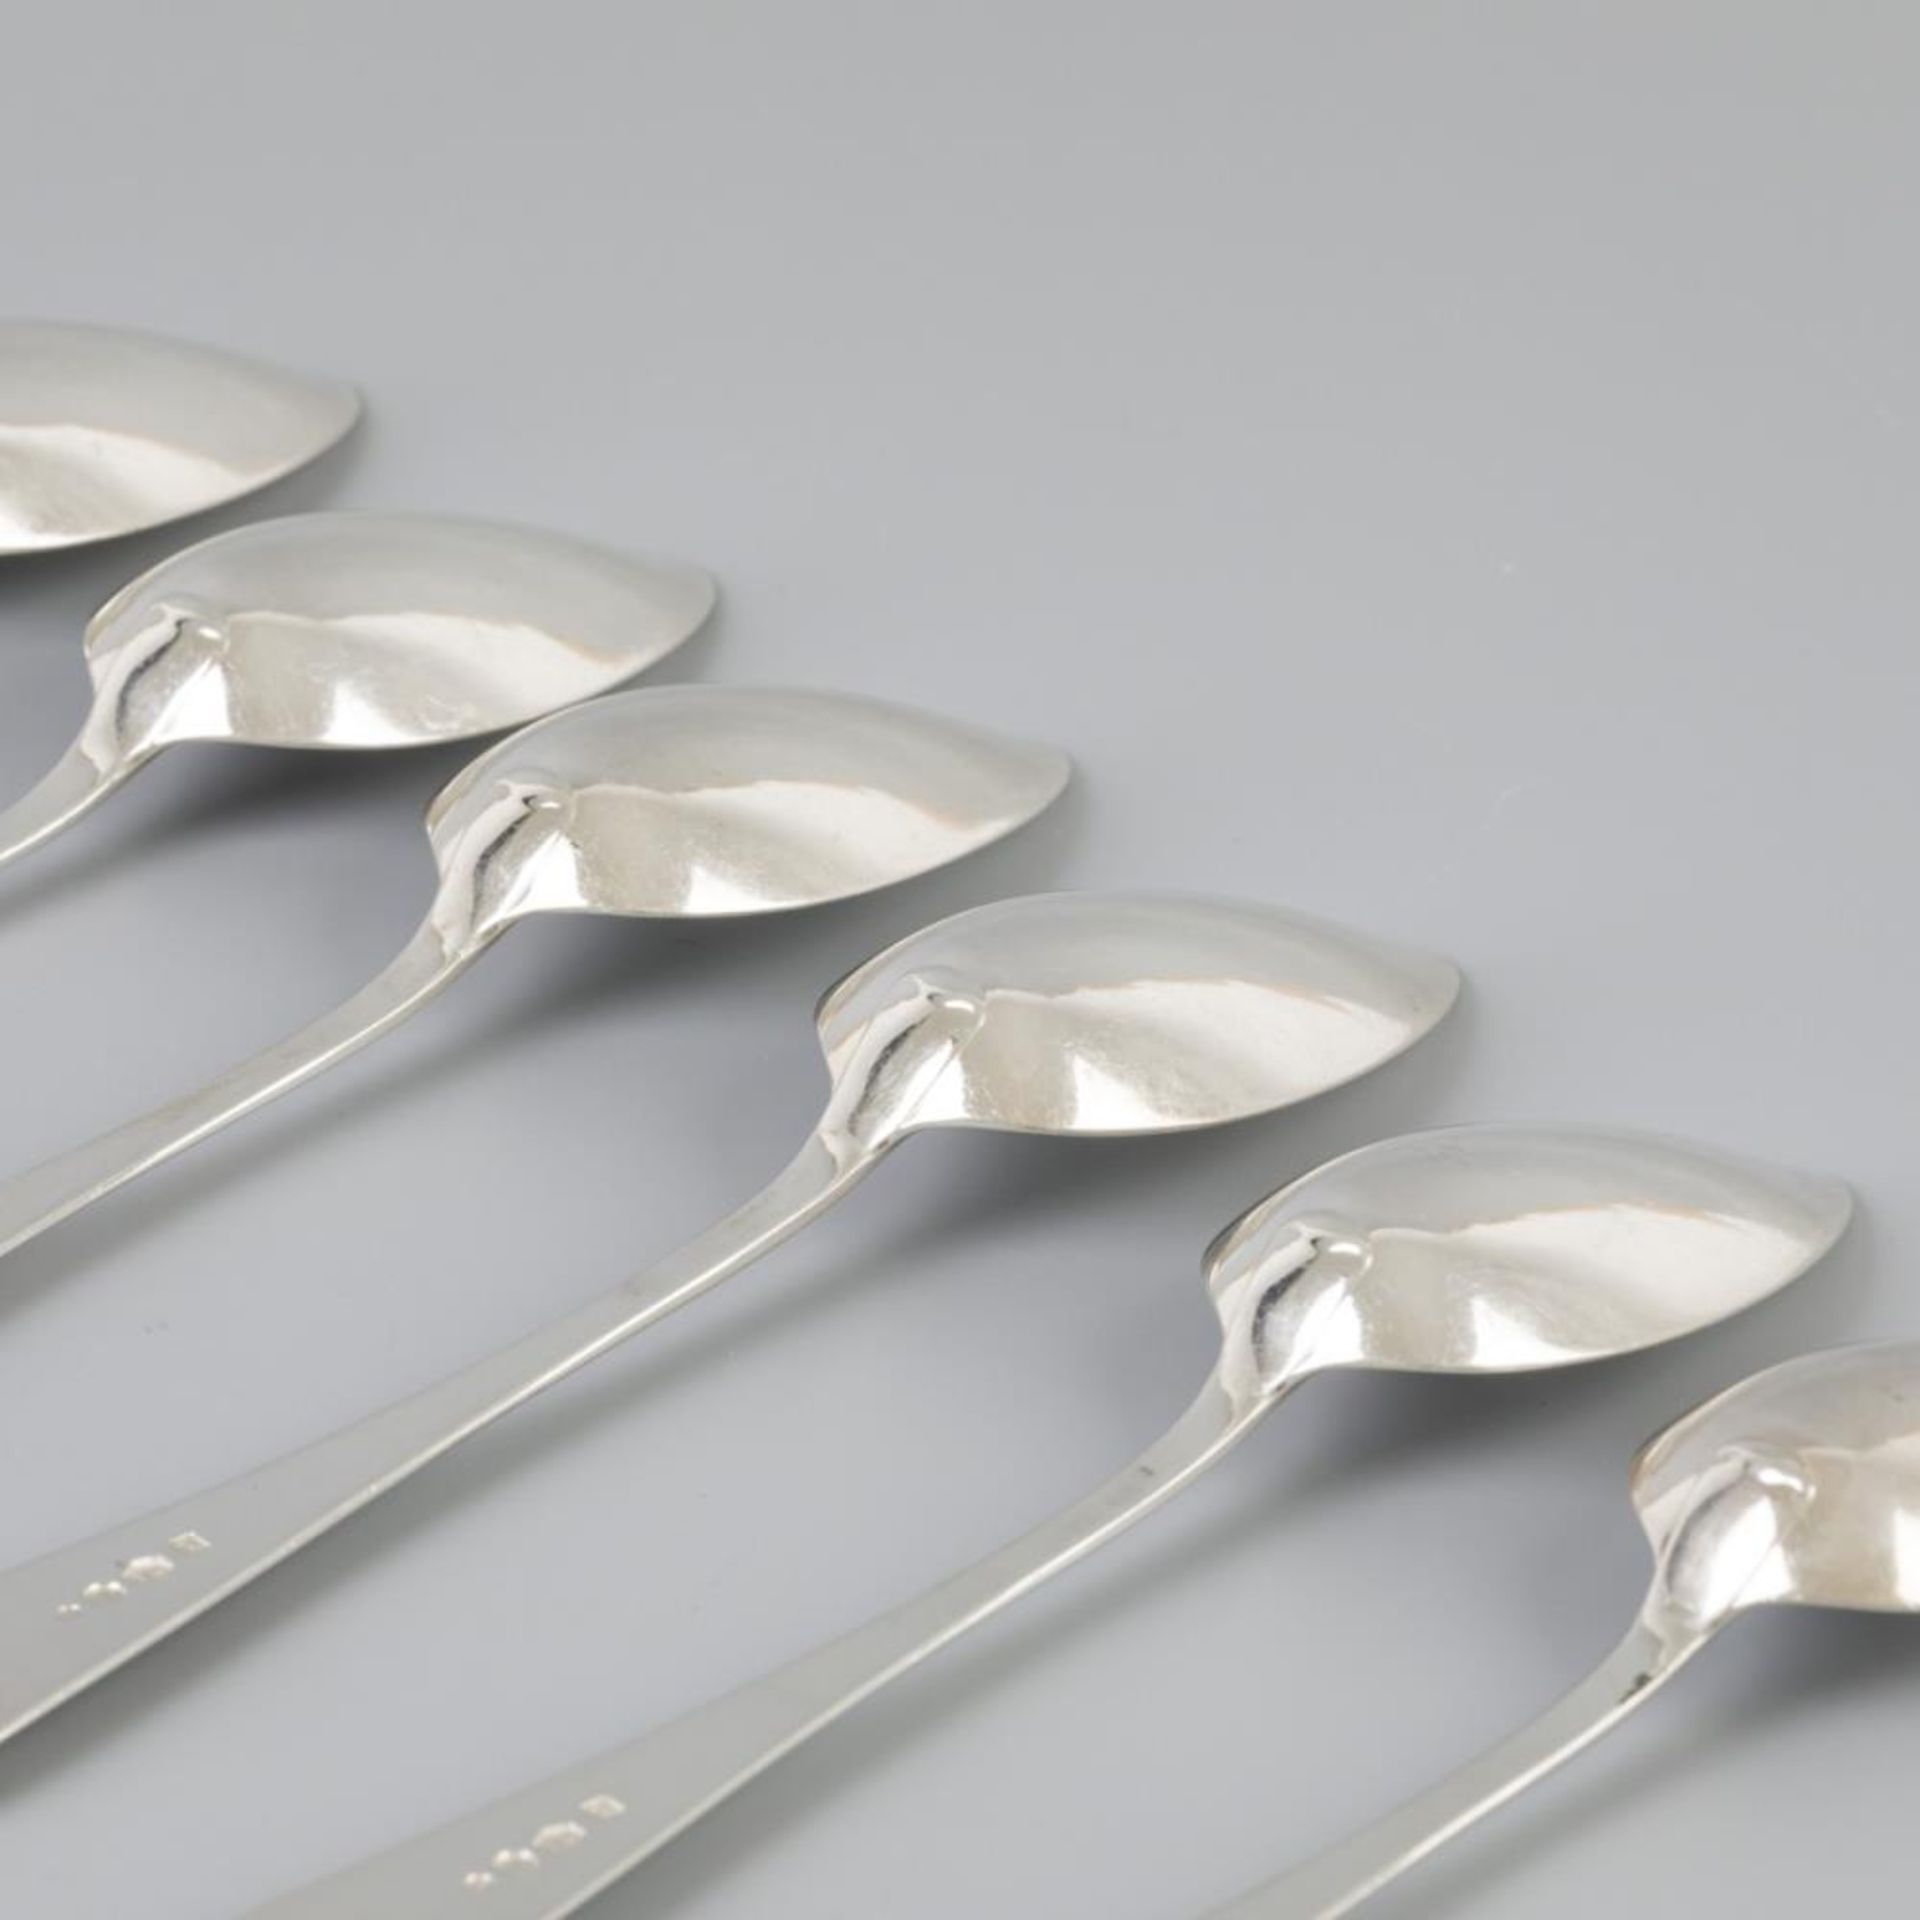 6 piece set of spoons "Haags Lofje" silver. - Image 3 of 6